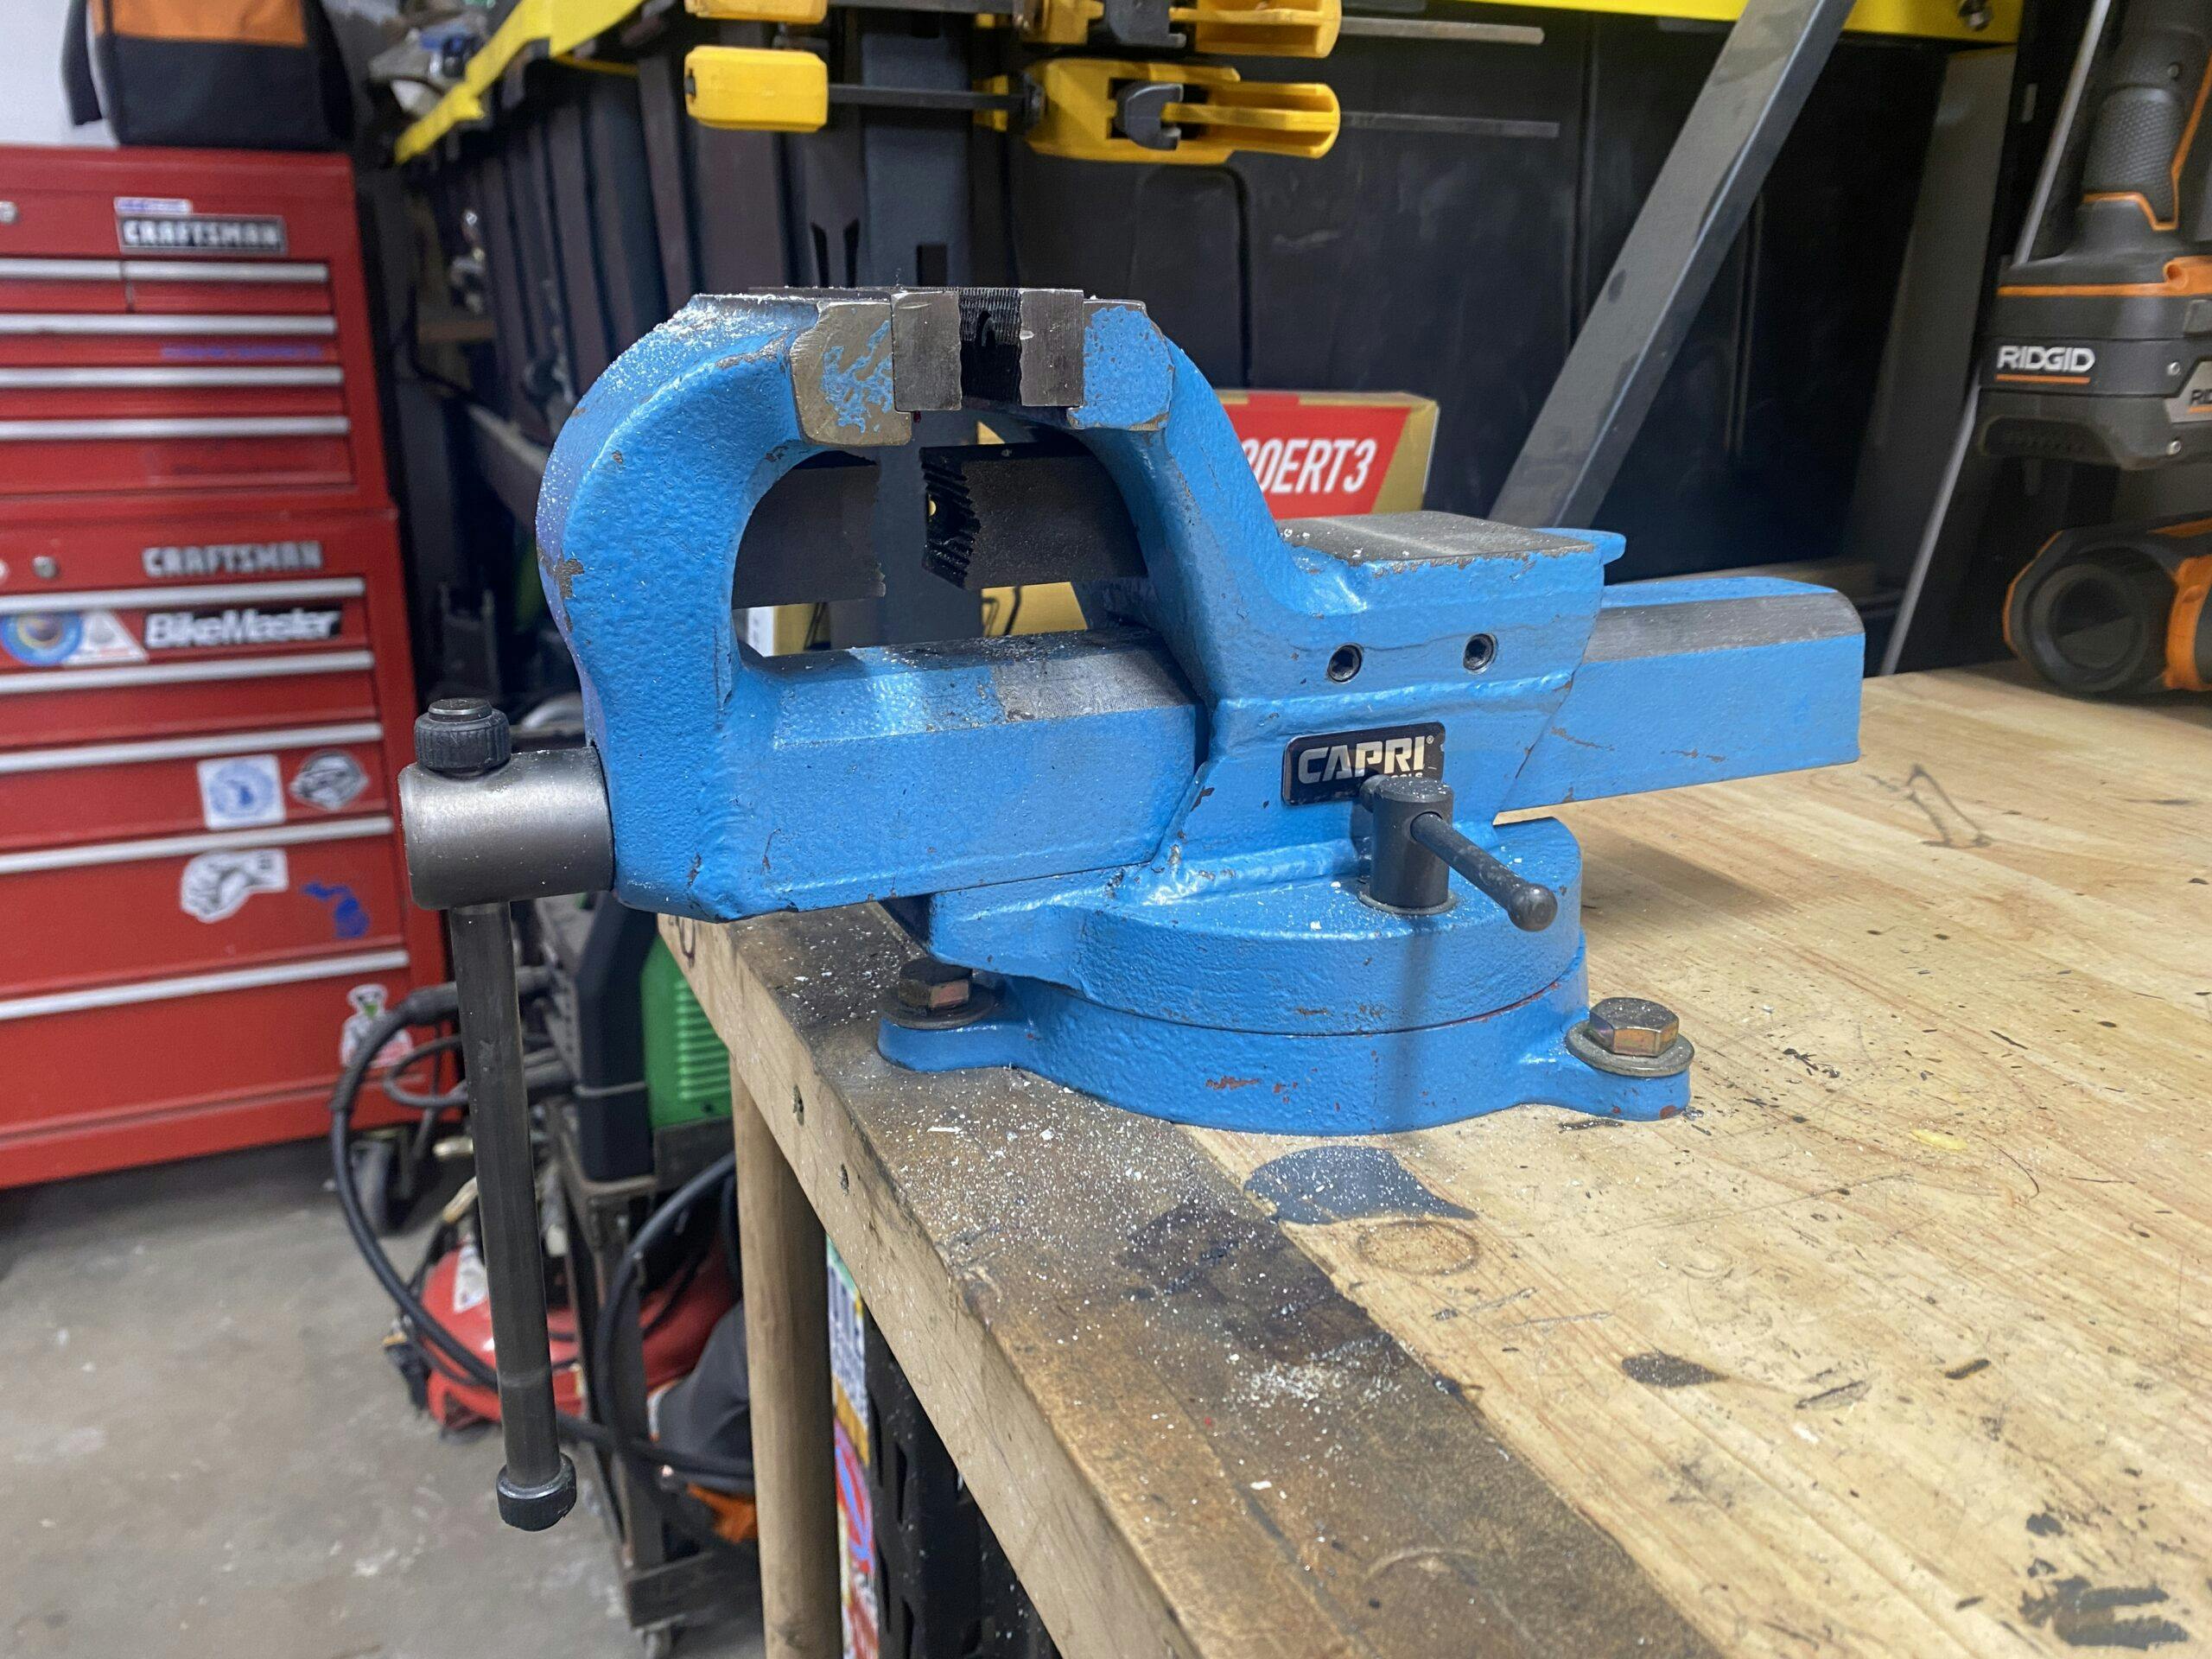 Capri forged bench vise on bench